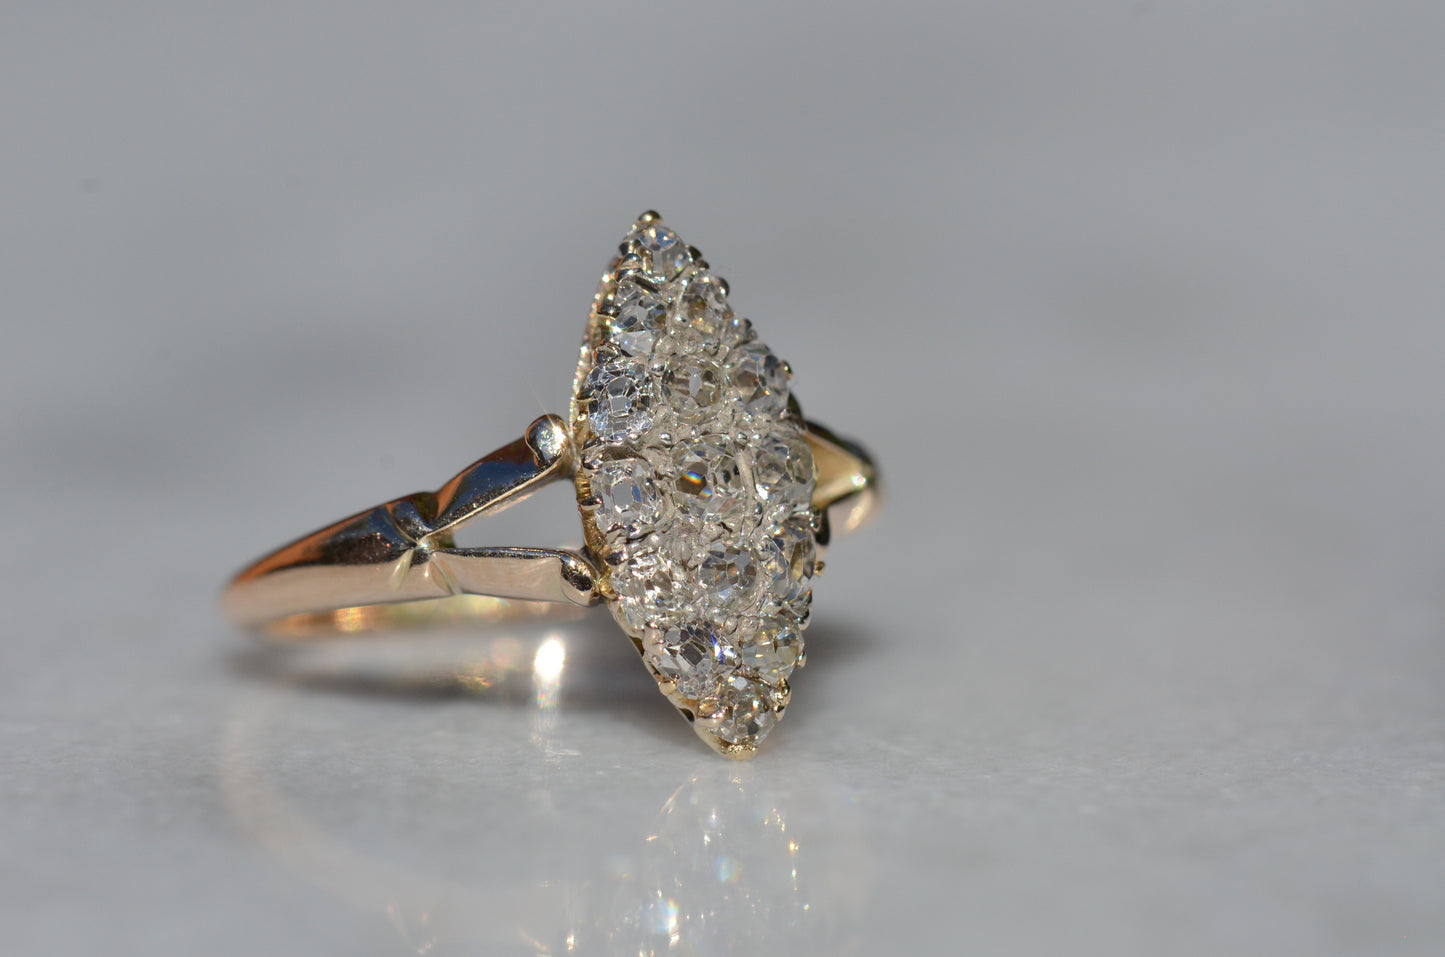 The closely cropped macro of this Victorian diamond navette ring is photographed turned slightly to the right to showcase the high rise of the crowns of each hand-cut diamond.